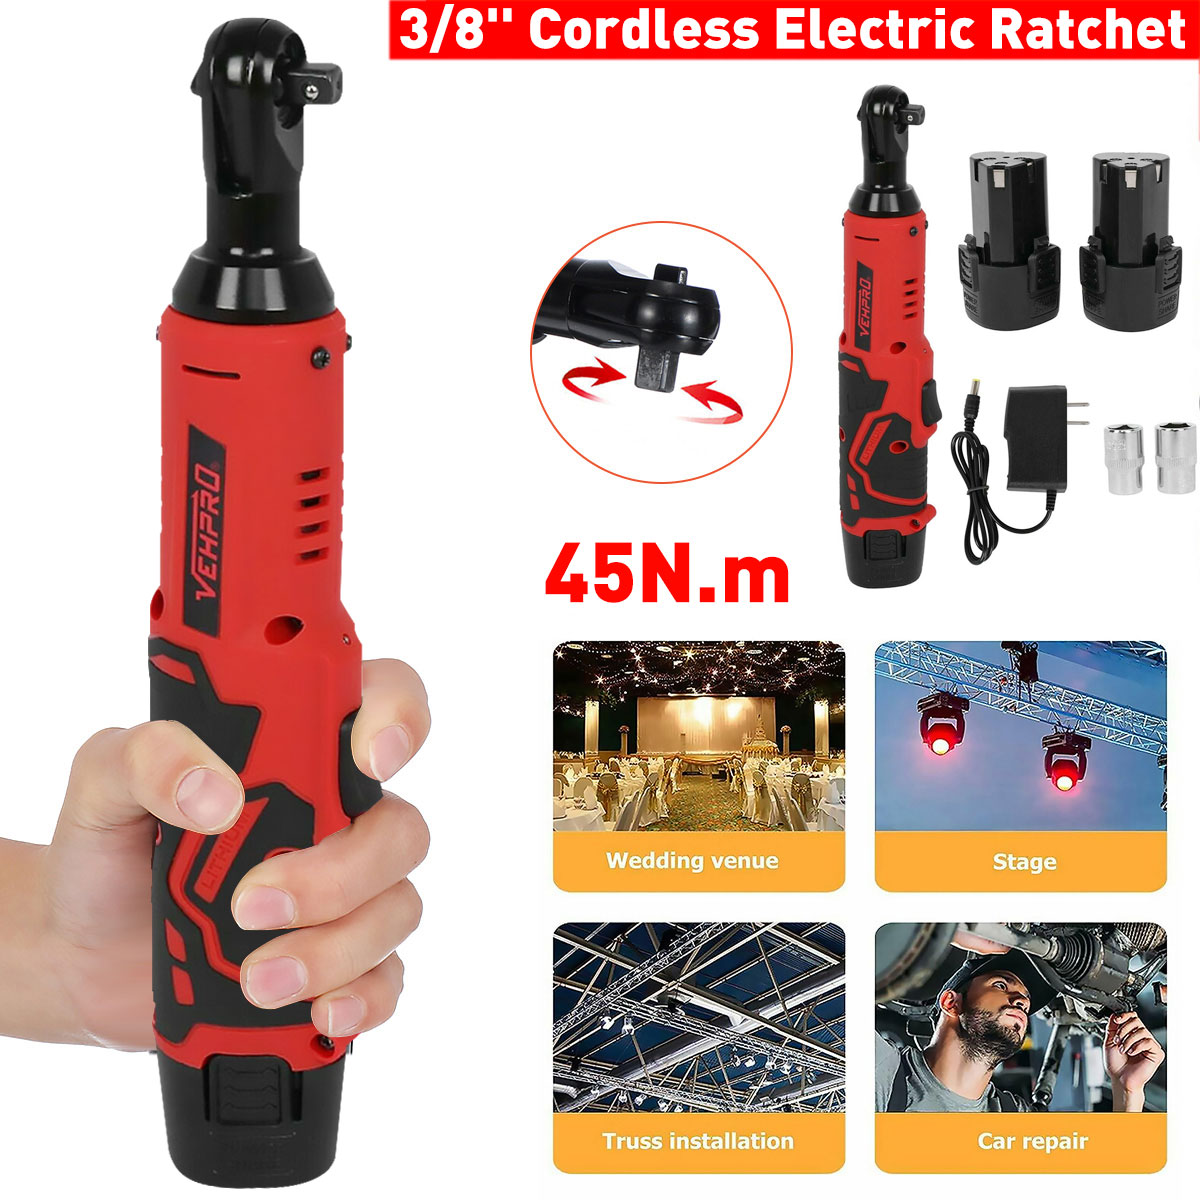 18V-45NM-Cordless-Eletctric-Ratchet-Wrench-38-Inch-Li-ion-Battery-Powered-Right-Angle-Wrench-With-2P-1843576-7